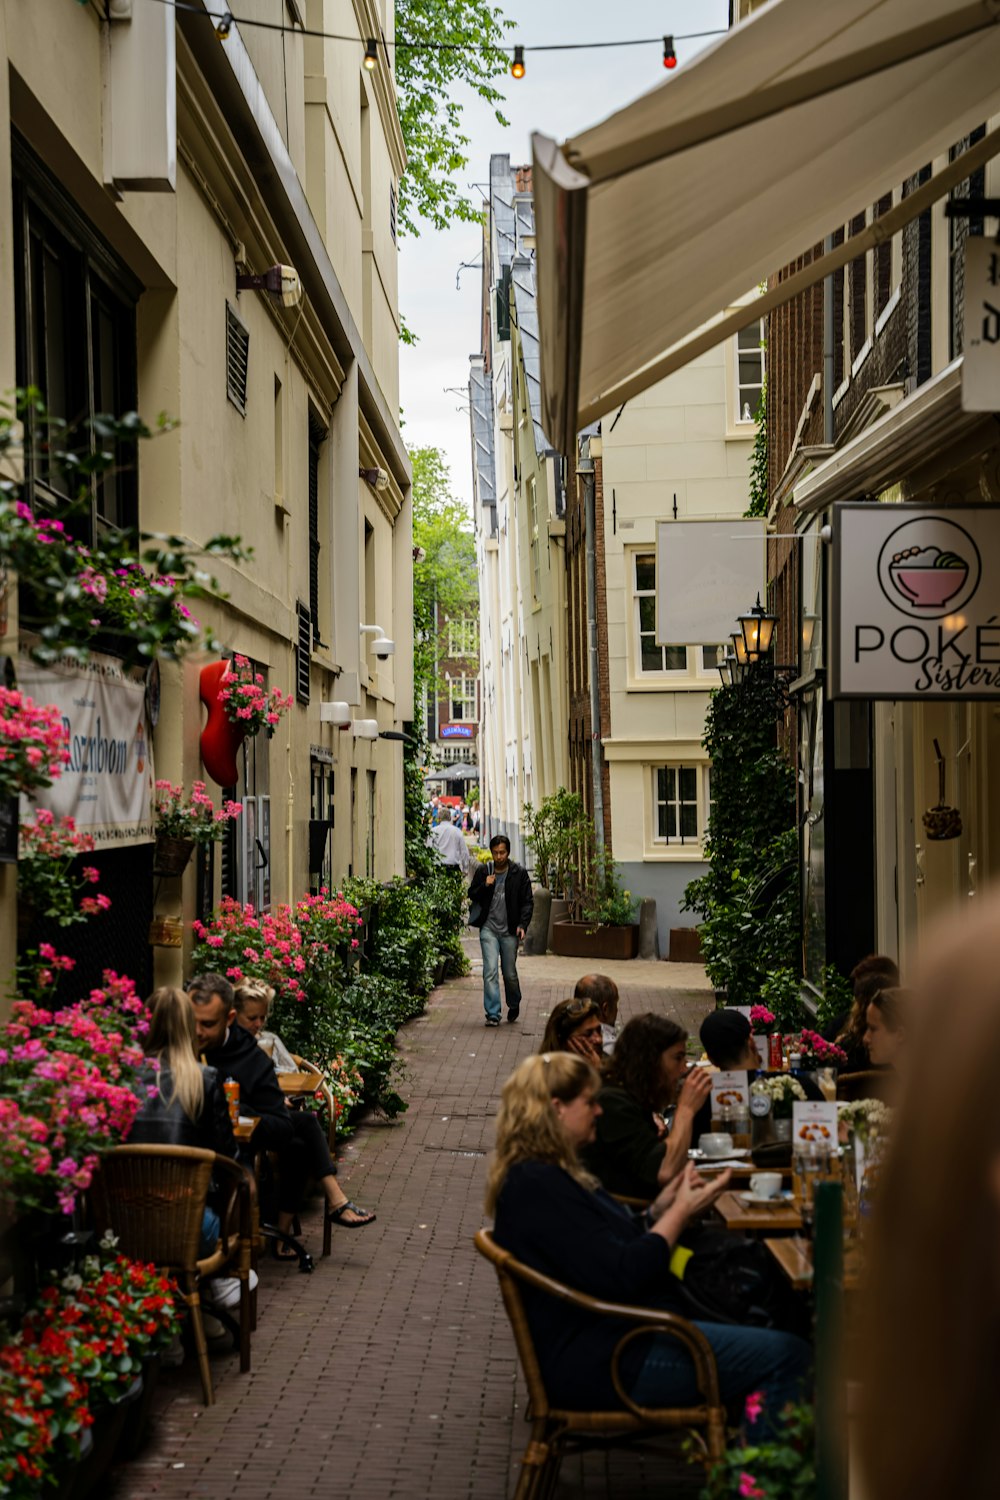 people sitting at tables in a narrow alley between buildings